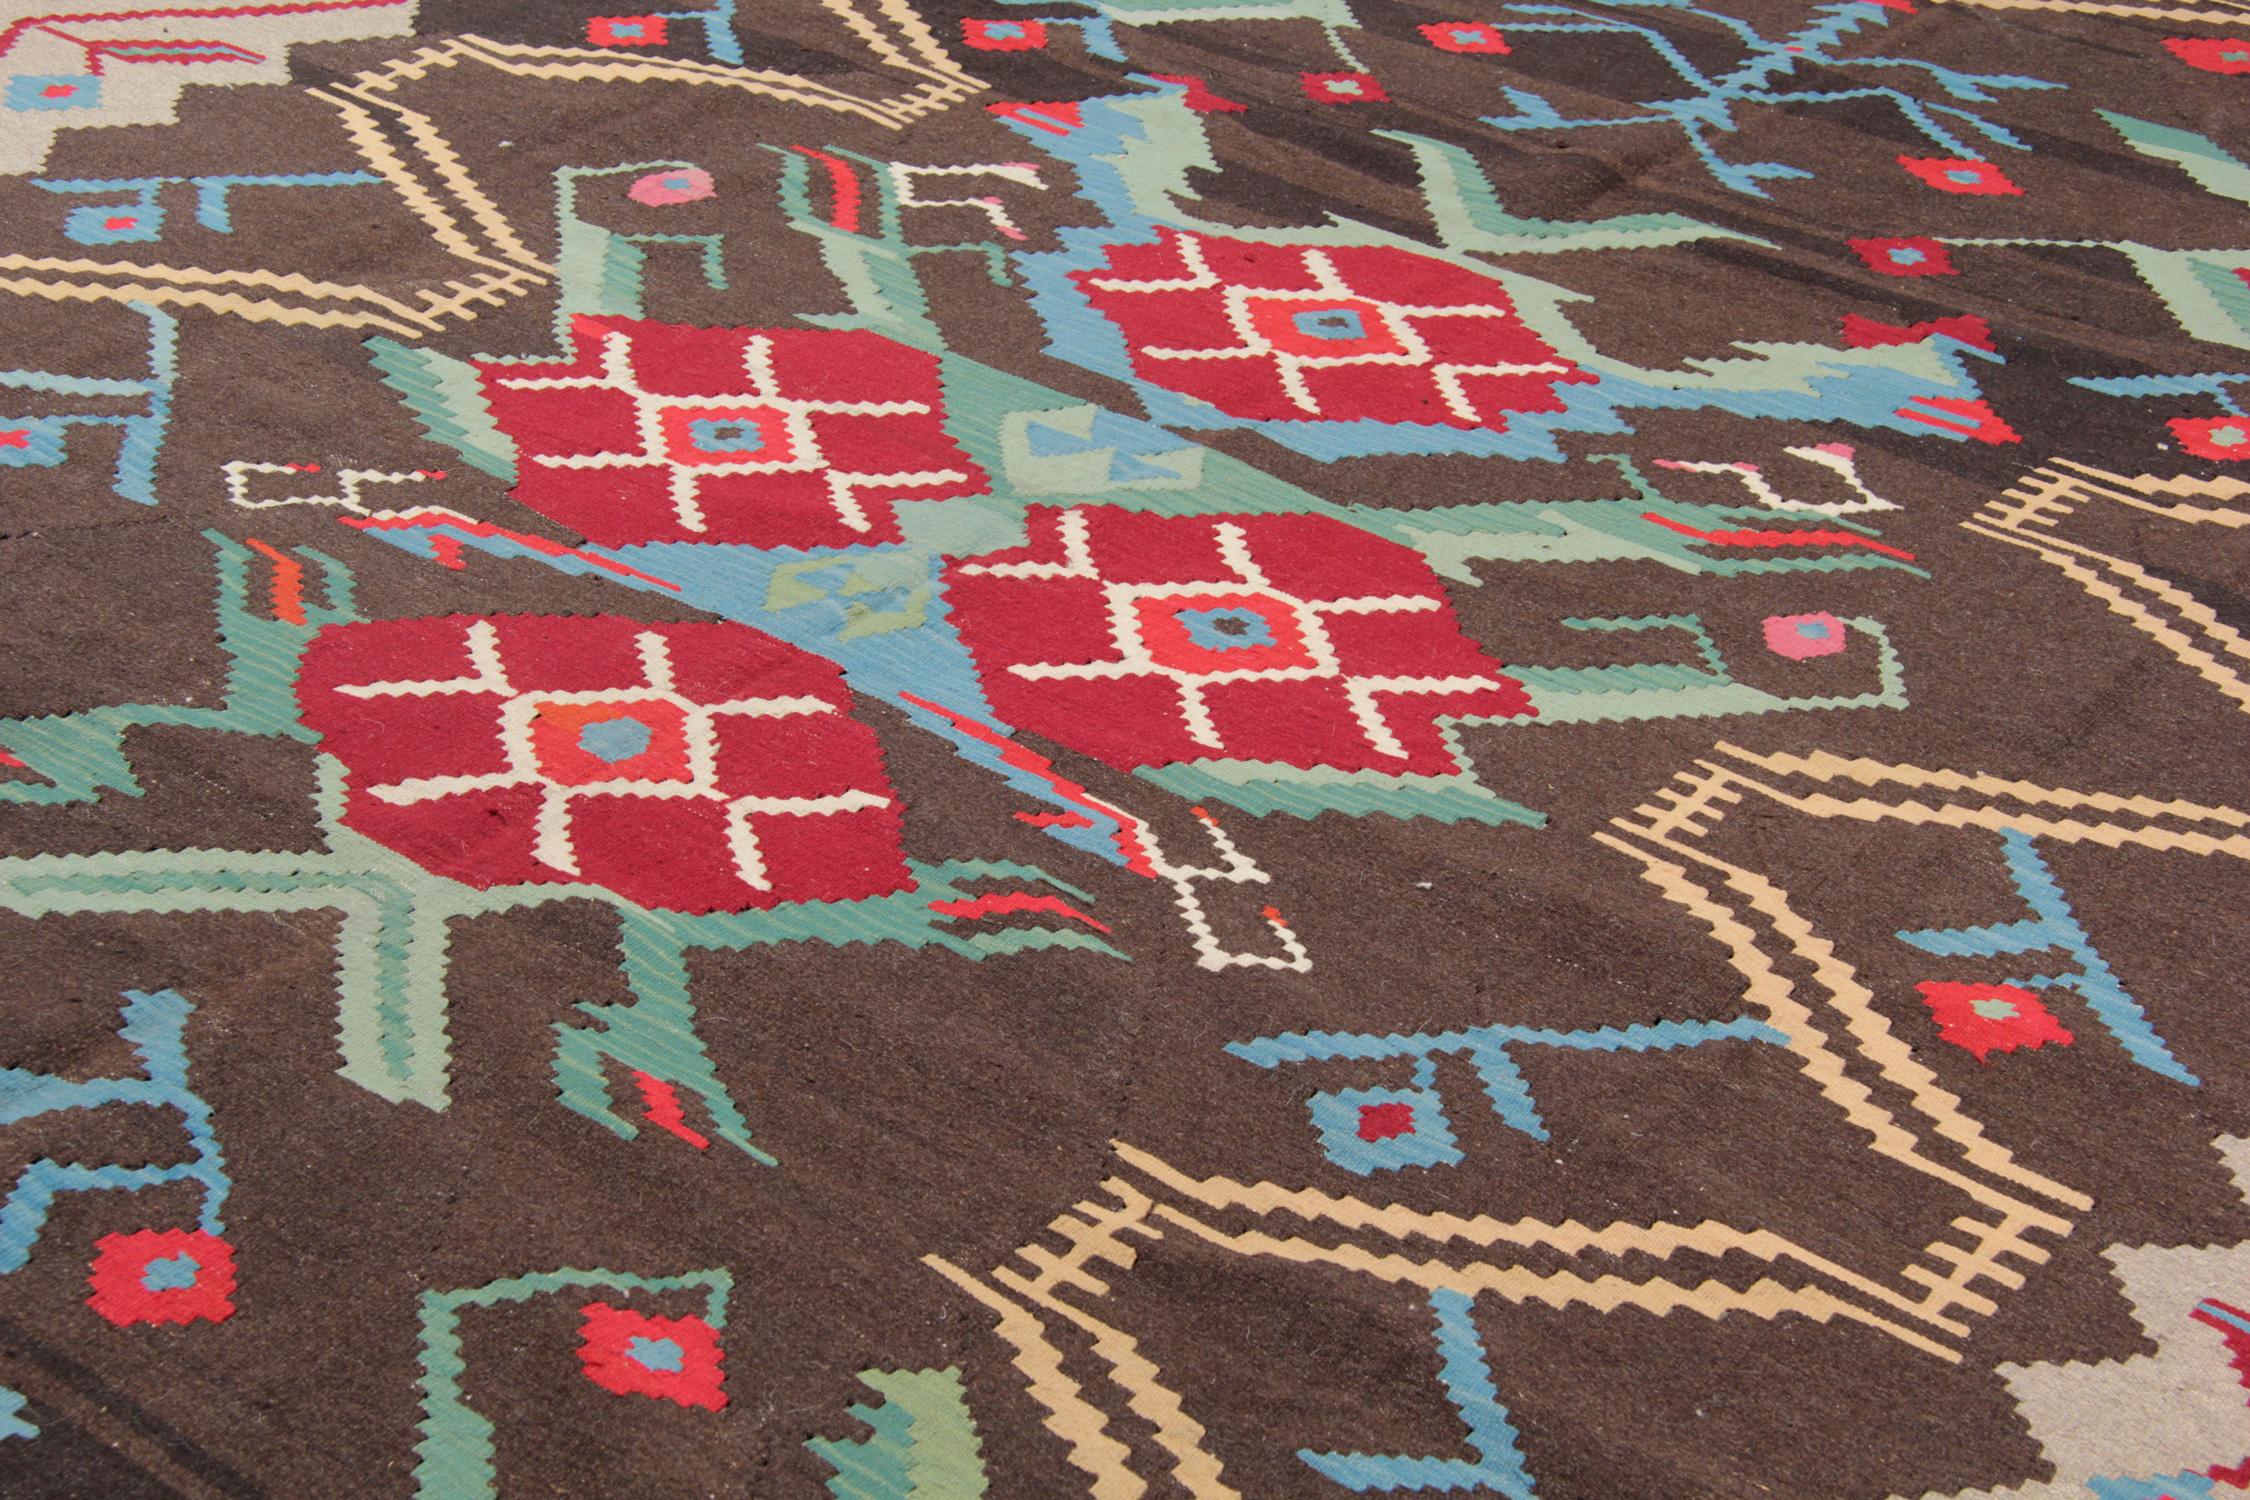 Mid-20th Century Antique Kilim Rugs, Handwoven Traditional Rugs, Carpet from Karabagh